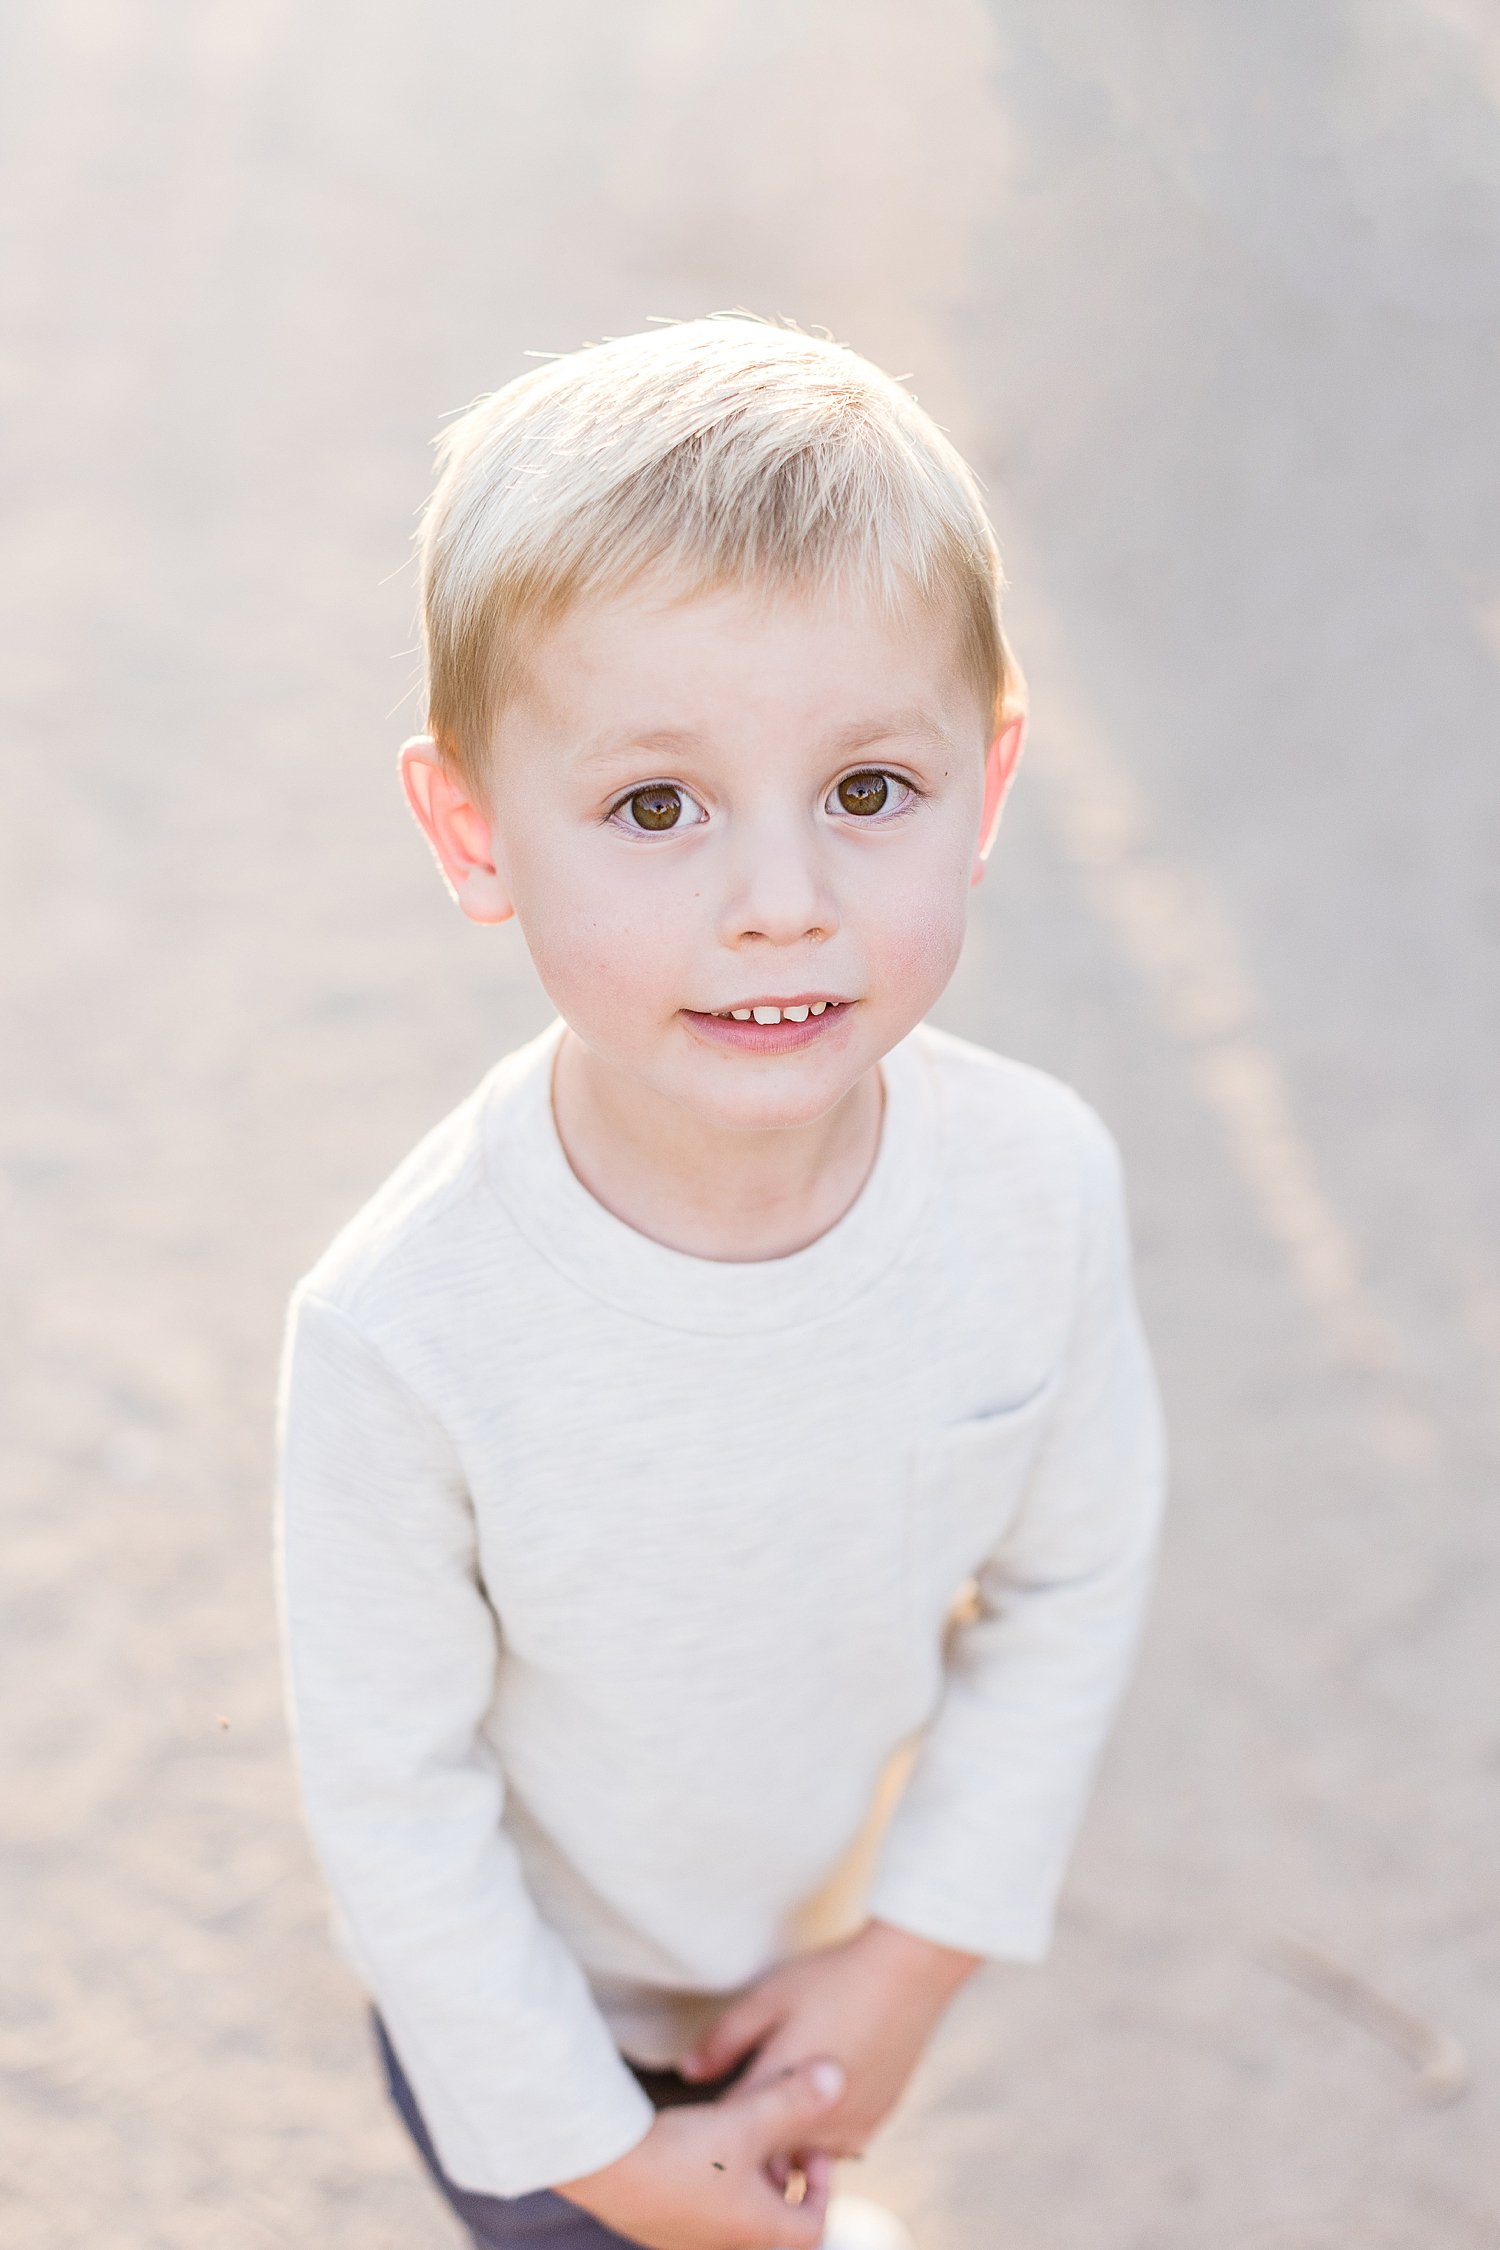 Toddler-aged boy standing and smiling | Ambre Williams Photography